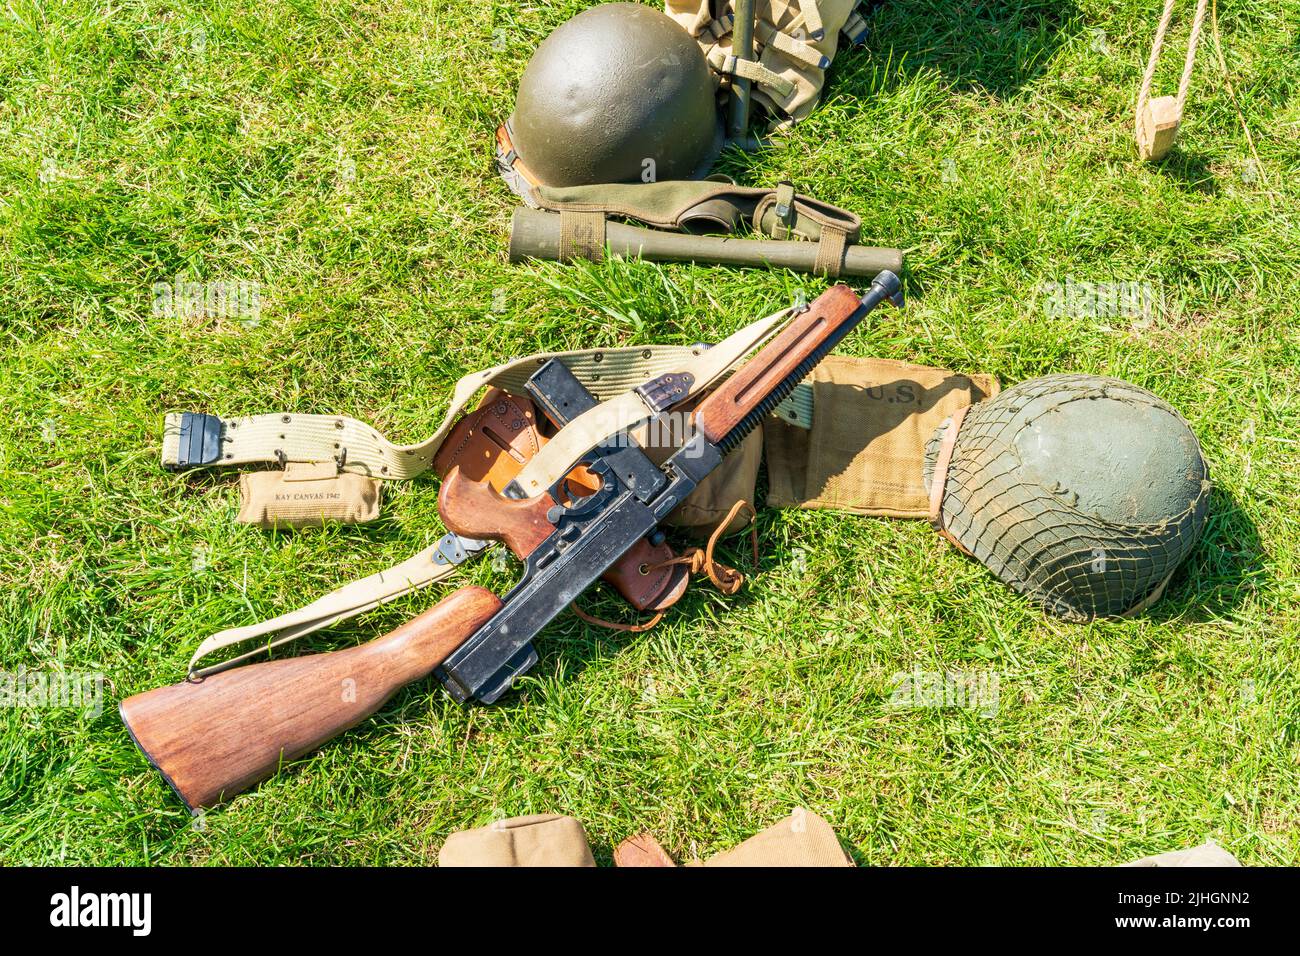 Second world war US army equipment laying on grass. Thompson submachine gun (tommy gun), helmet, belt, and ammo pouches. Stock Photo